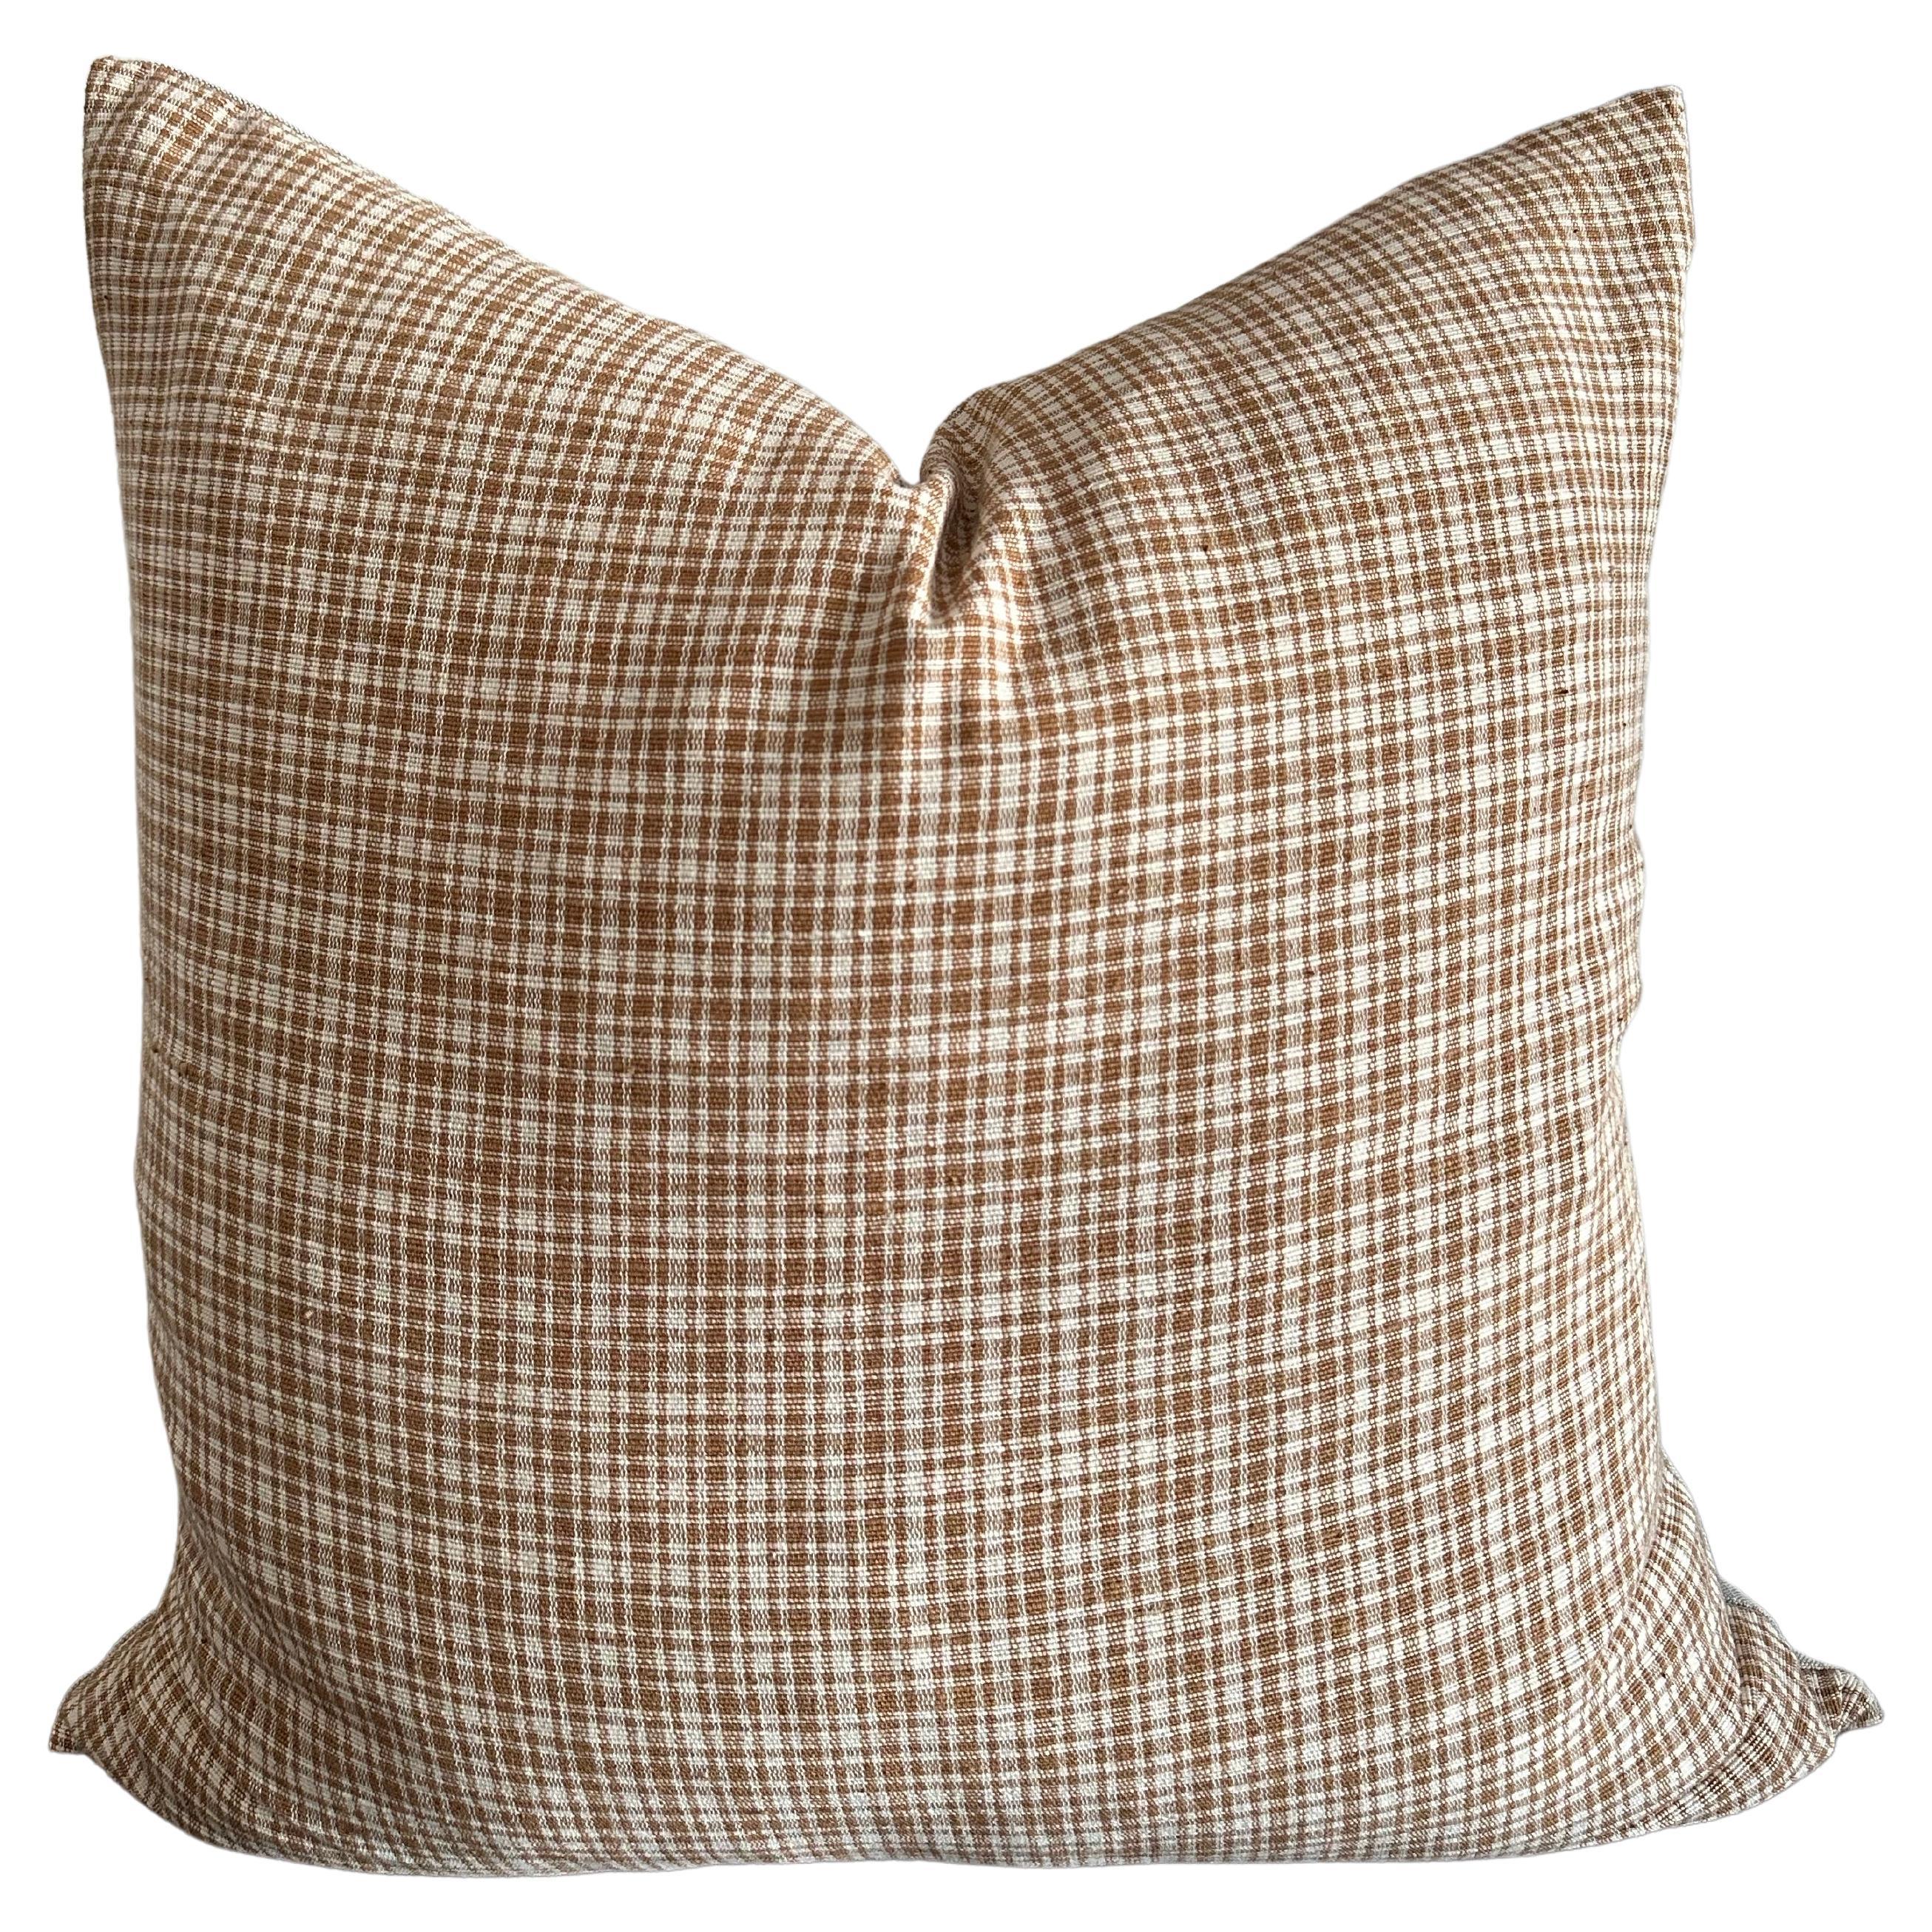 Tiburon Woven Brown Plaid Pillow with Down Feather Insert For Sale